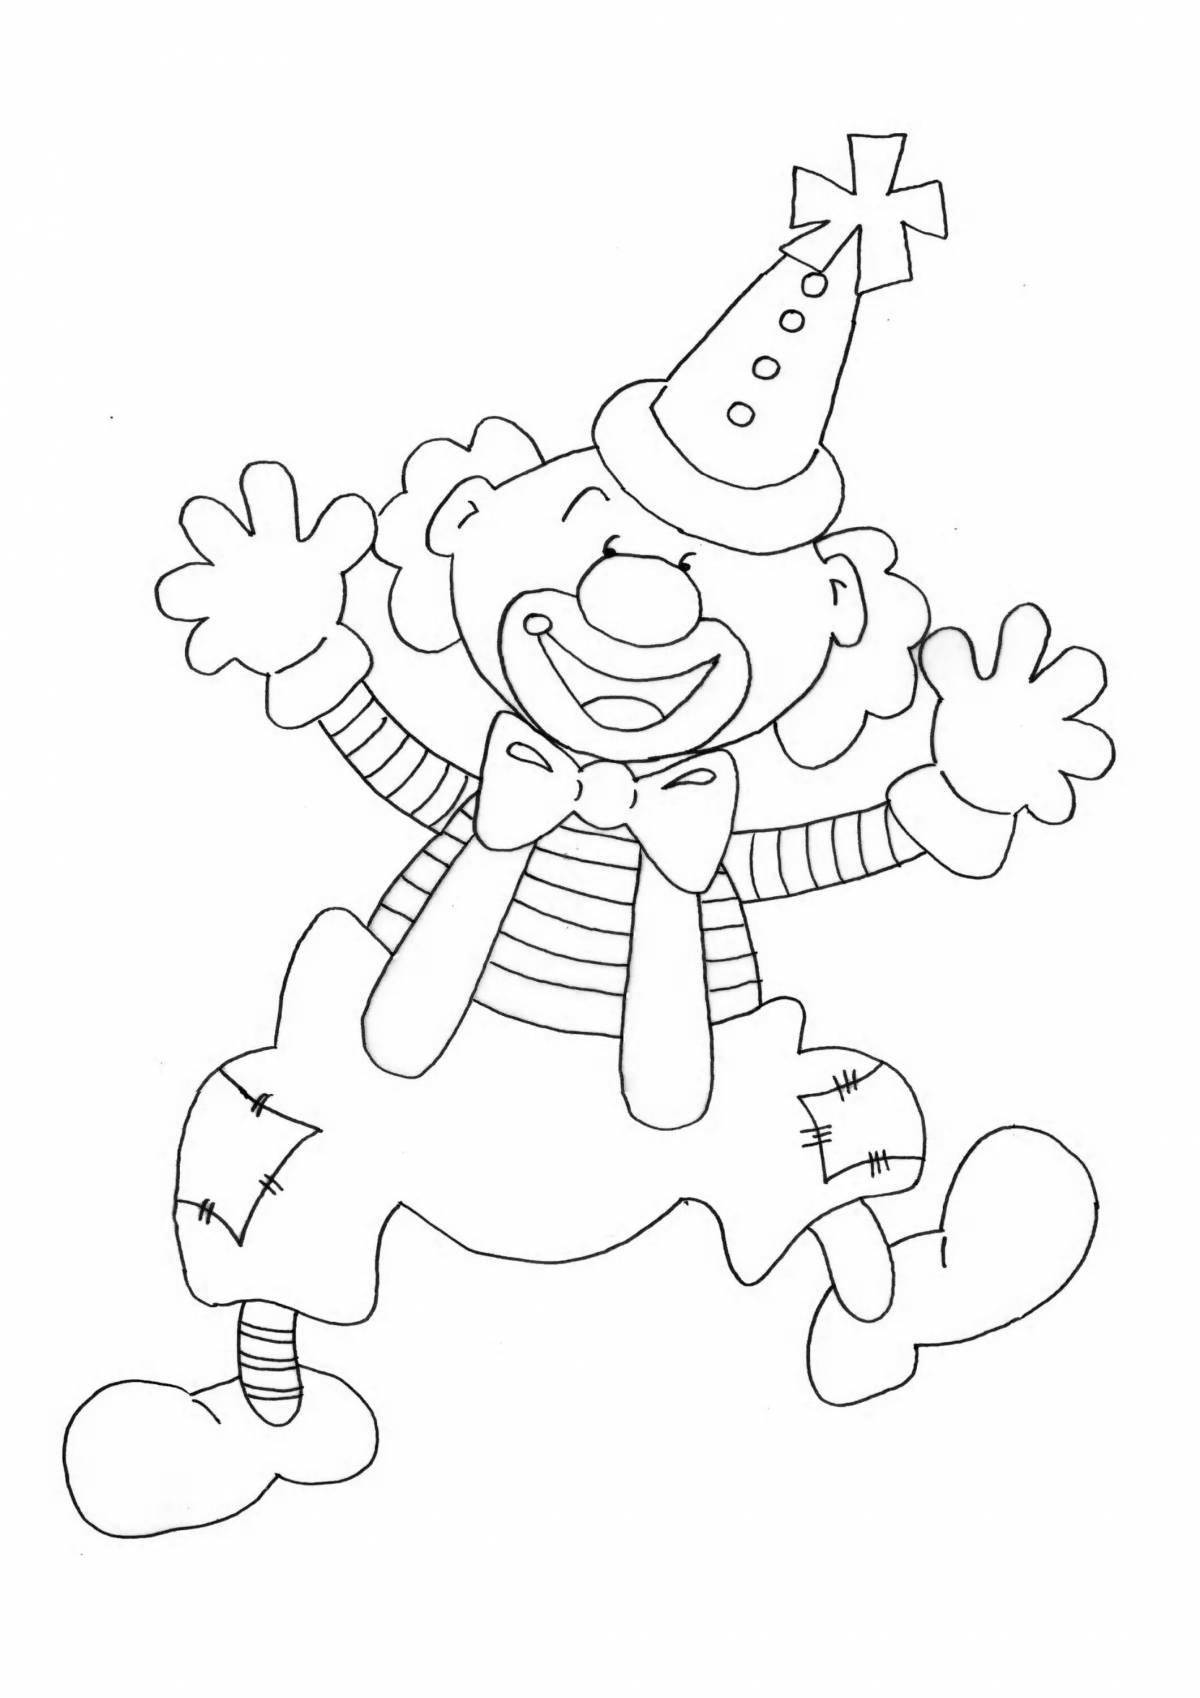 Coloring clown for children